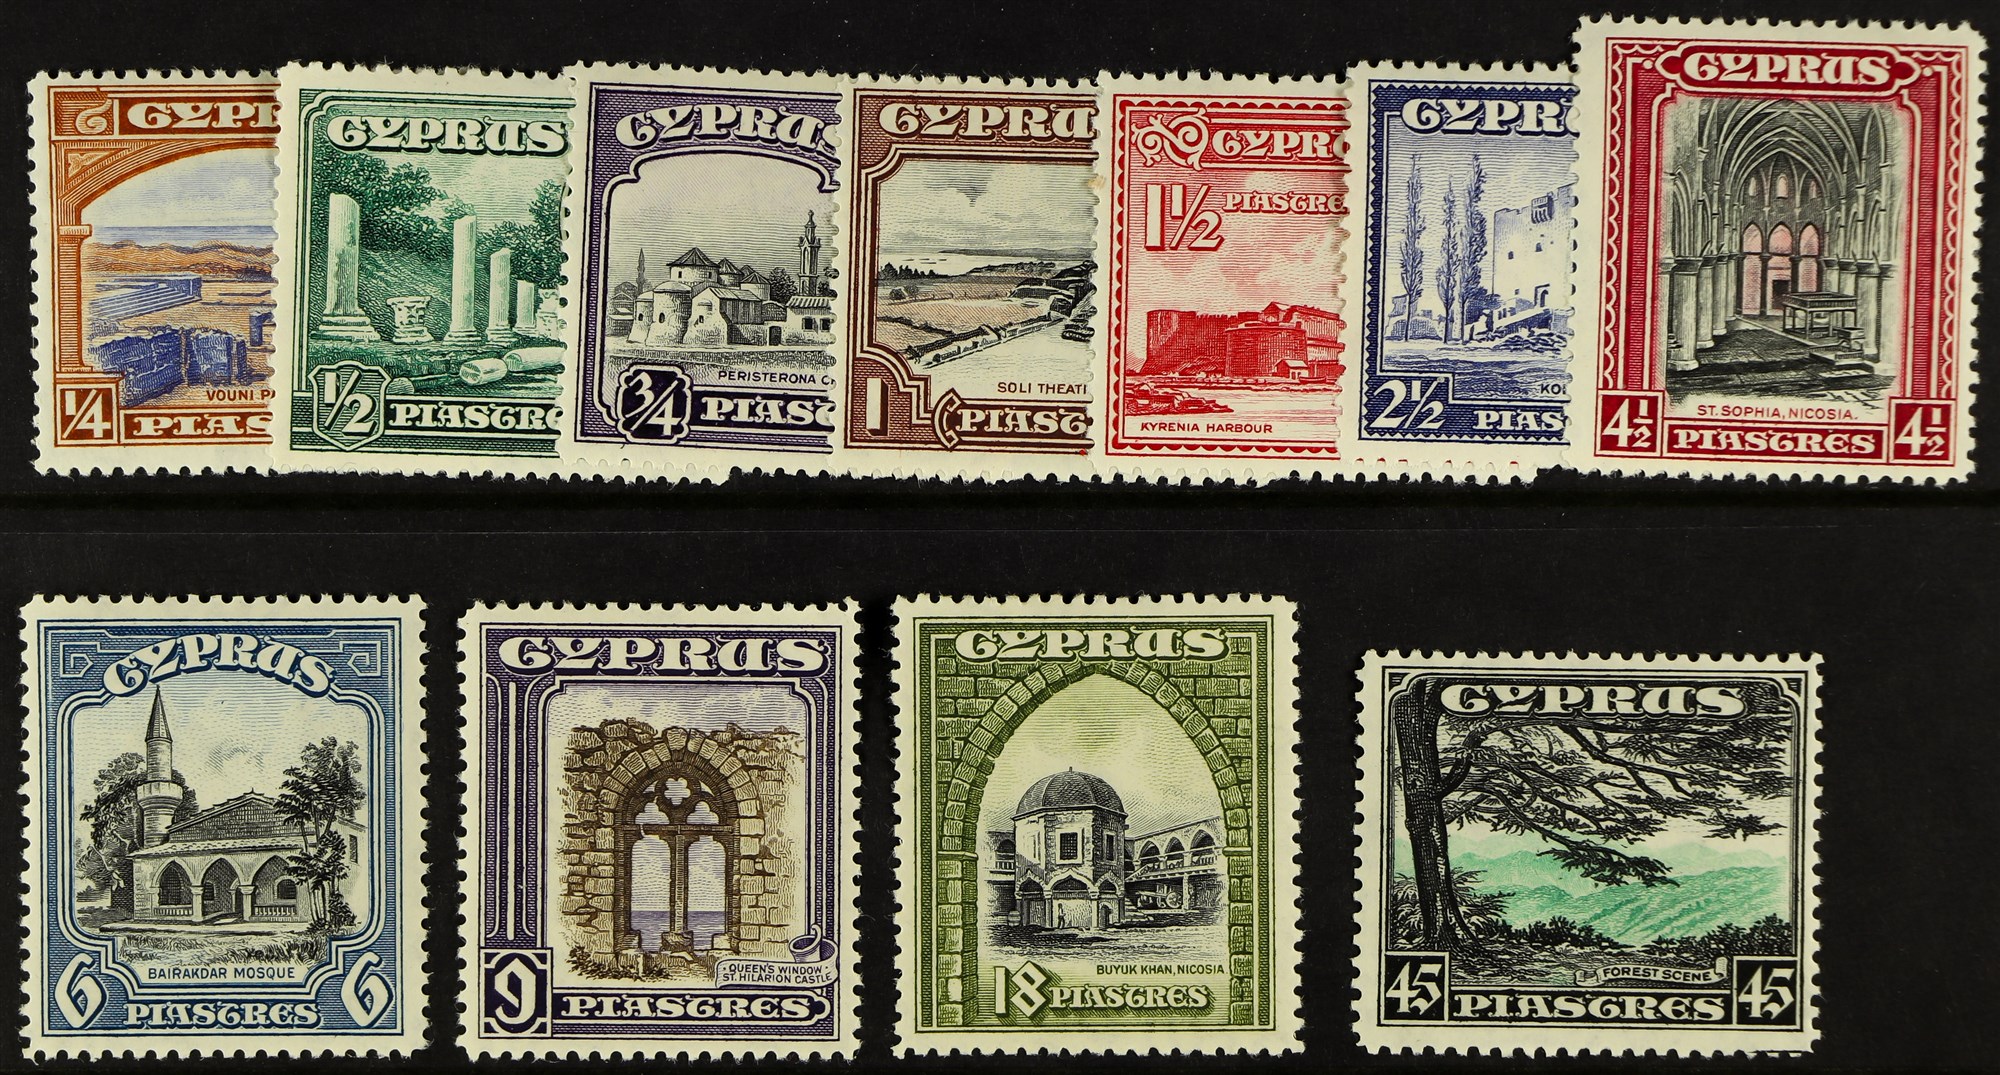 CYPRUS 1934 Pictorial set, SG 133/143, lightly hinged mint. Cat. £200. (11 stamps)